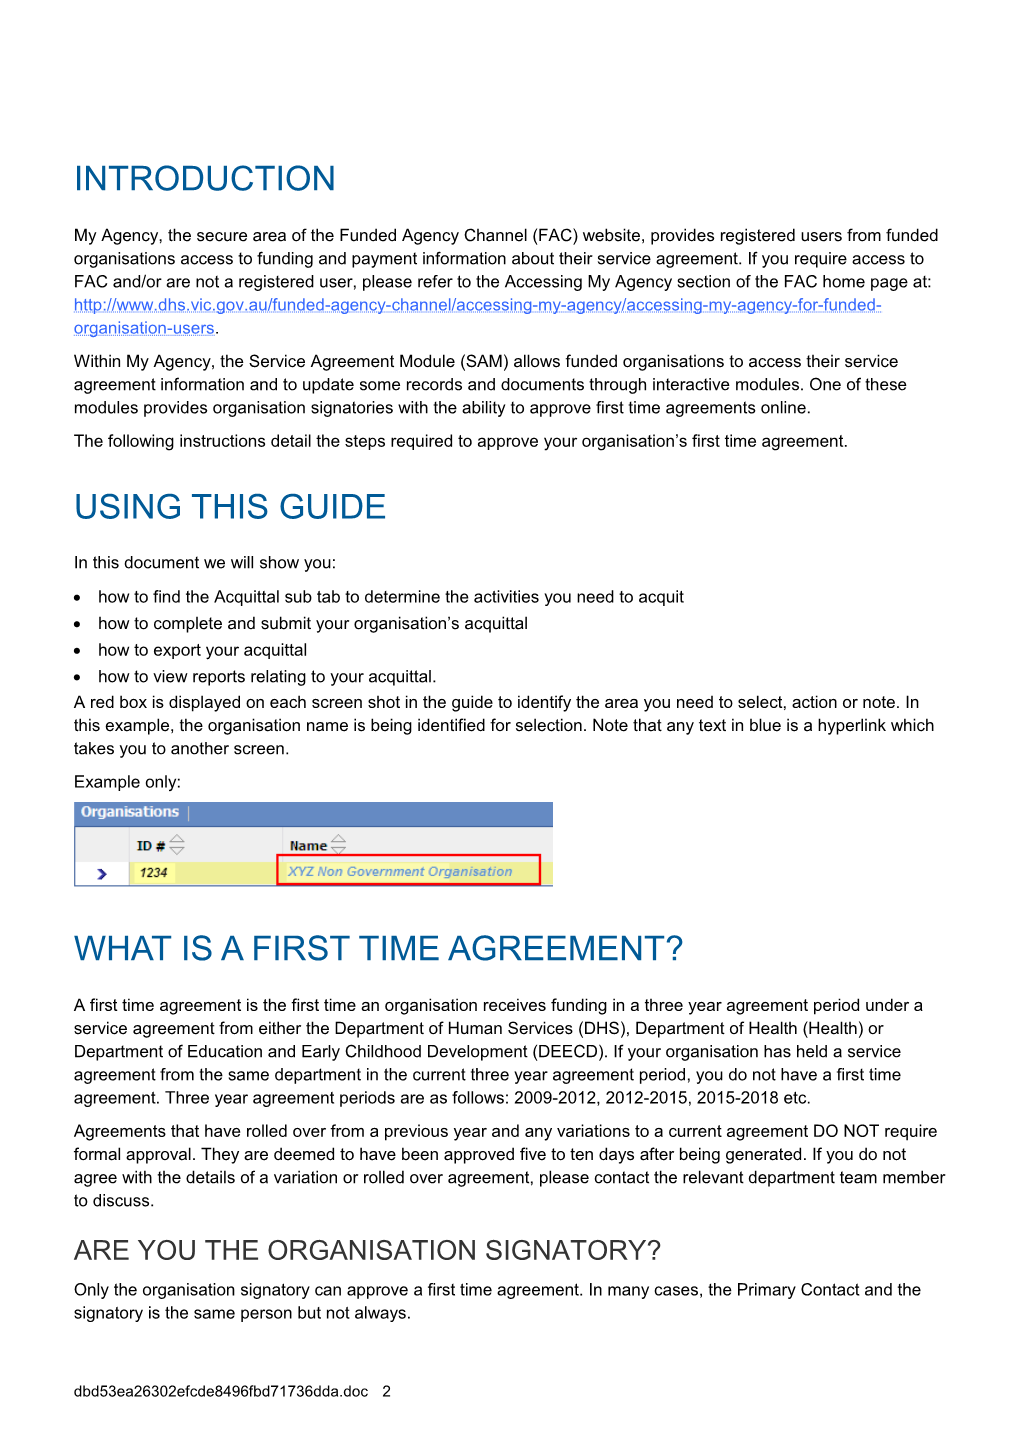 How to Accept a First Time Agreement in the Service Agreement Module (SAM)